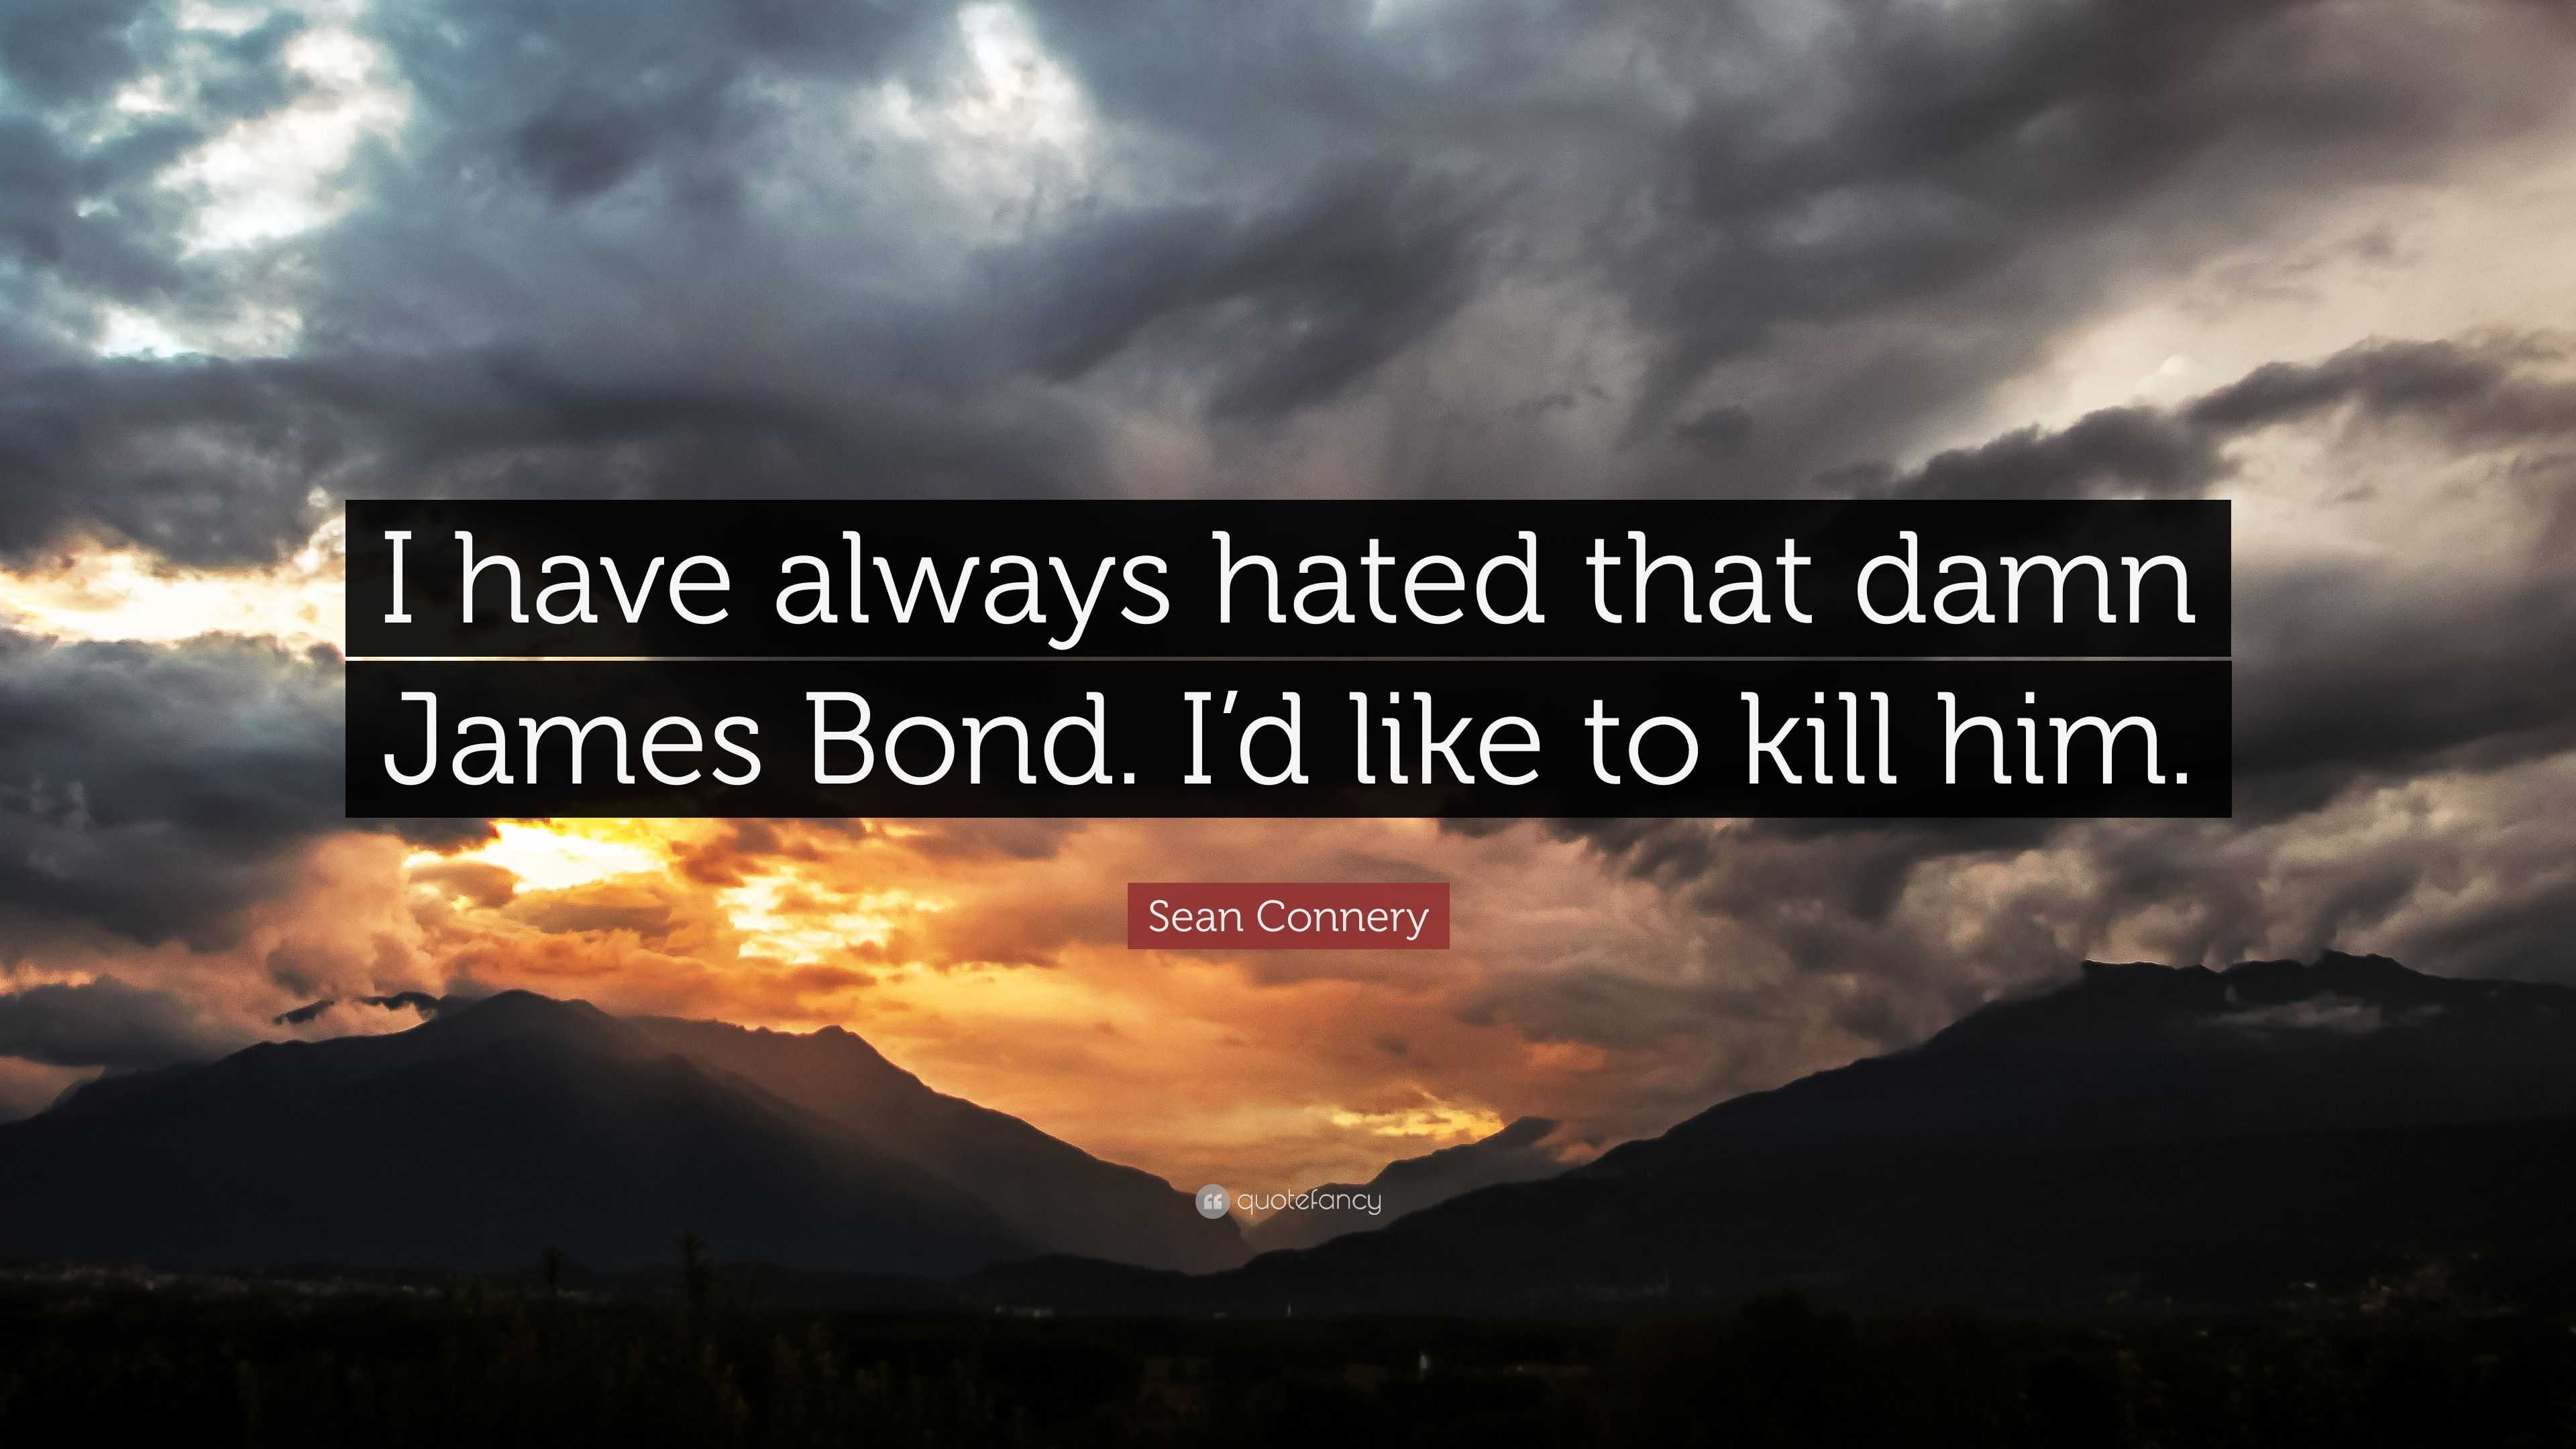 Sean Connery Quote: “I have always hated that damn James Bond. I’d like ...